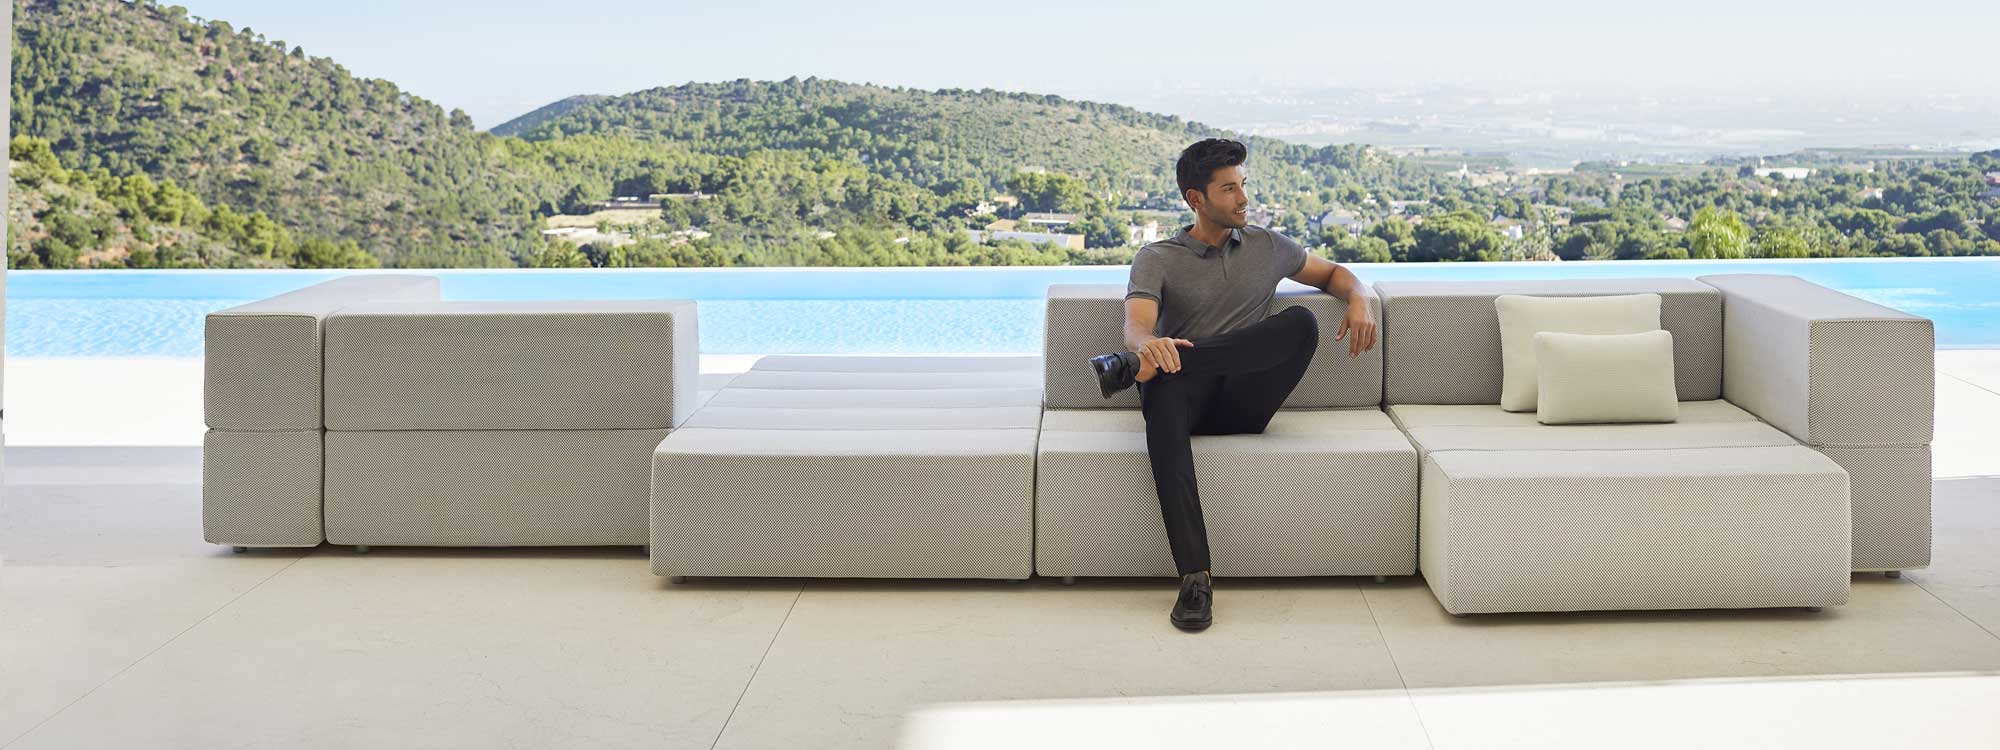 Image of dude sat on Vondom Tablet designer garden sofa with swimming pool and hills in the background